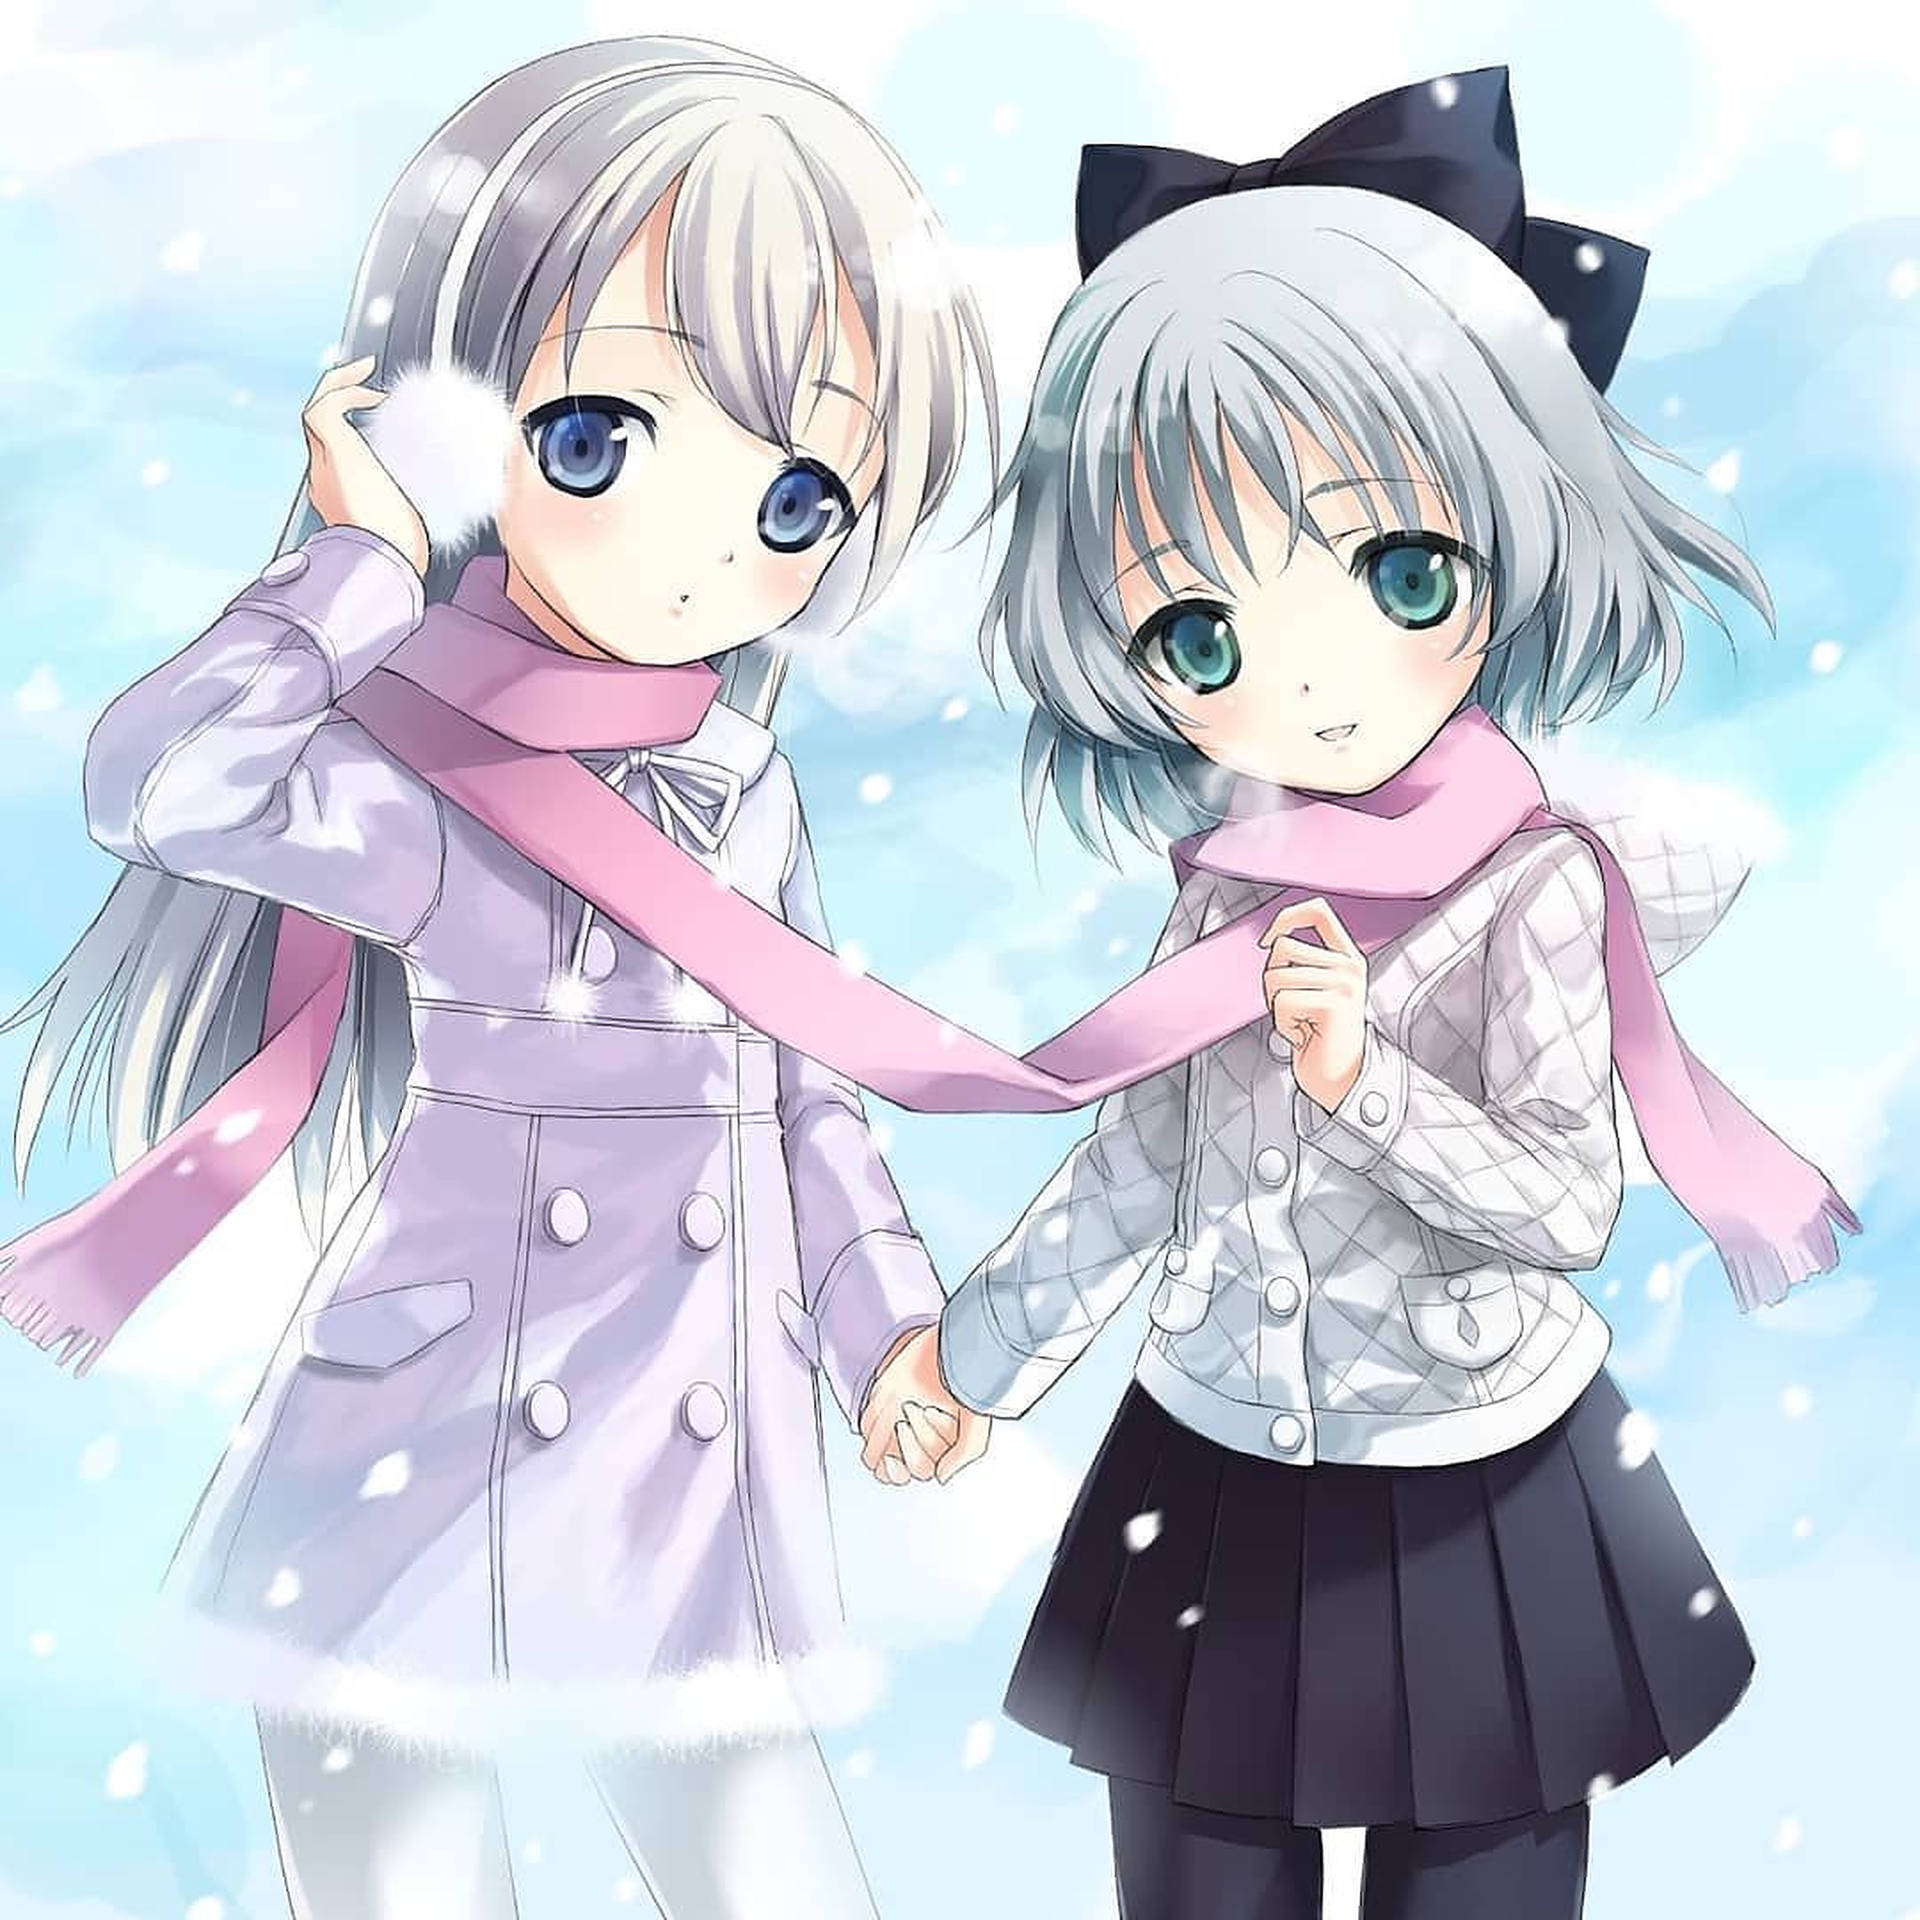 Anime Kids Winter Clothes Wallpaper